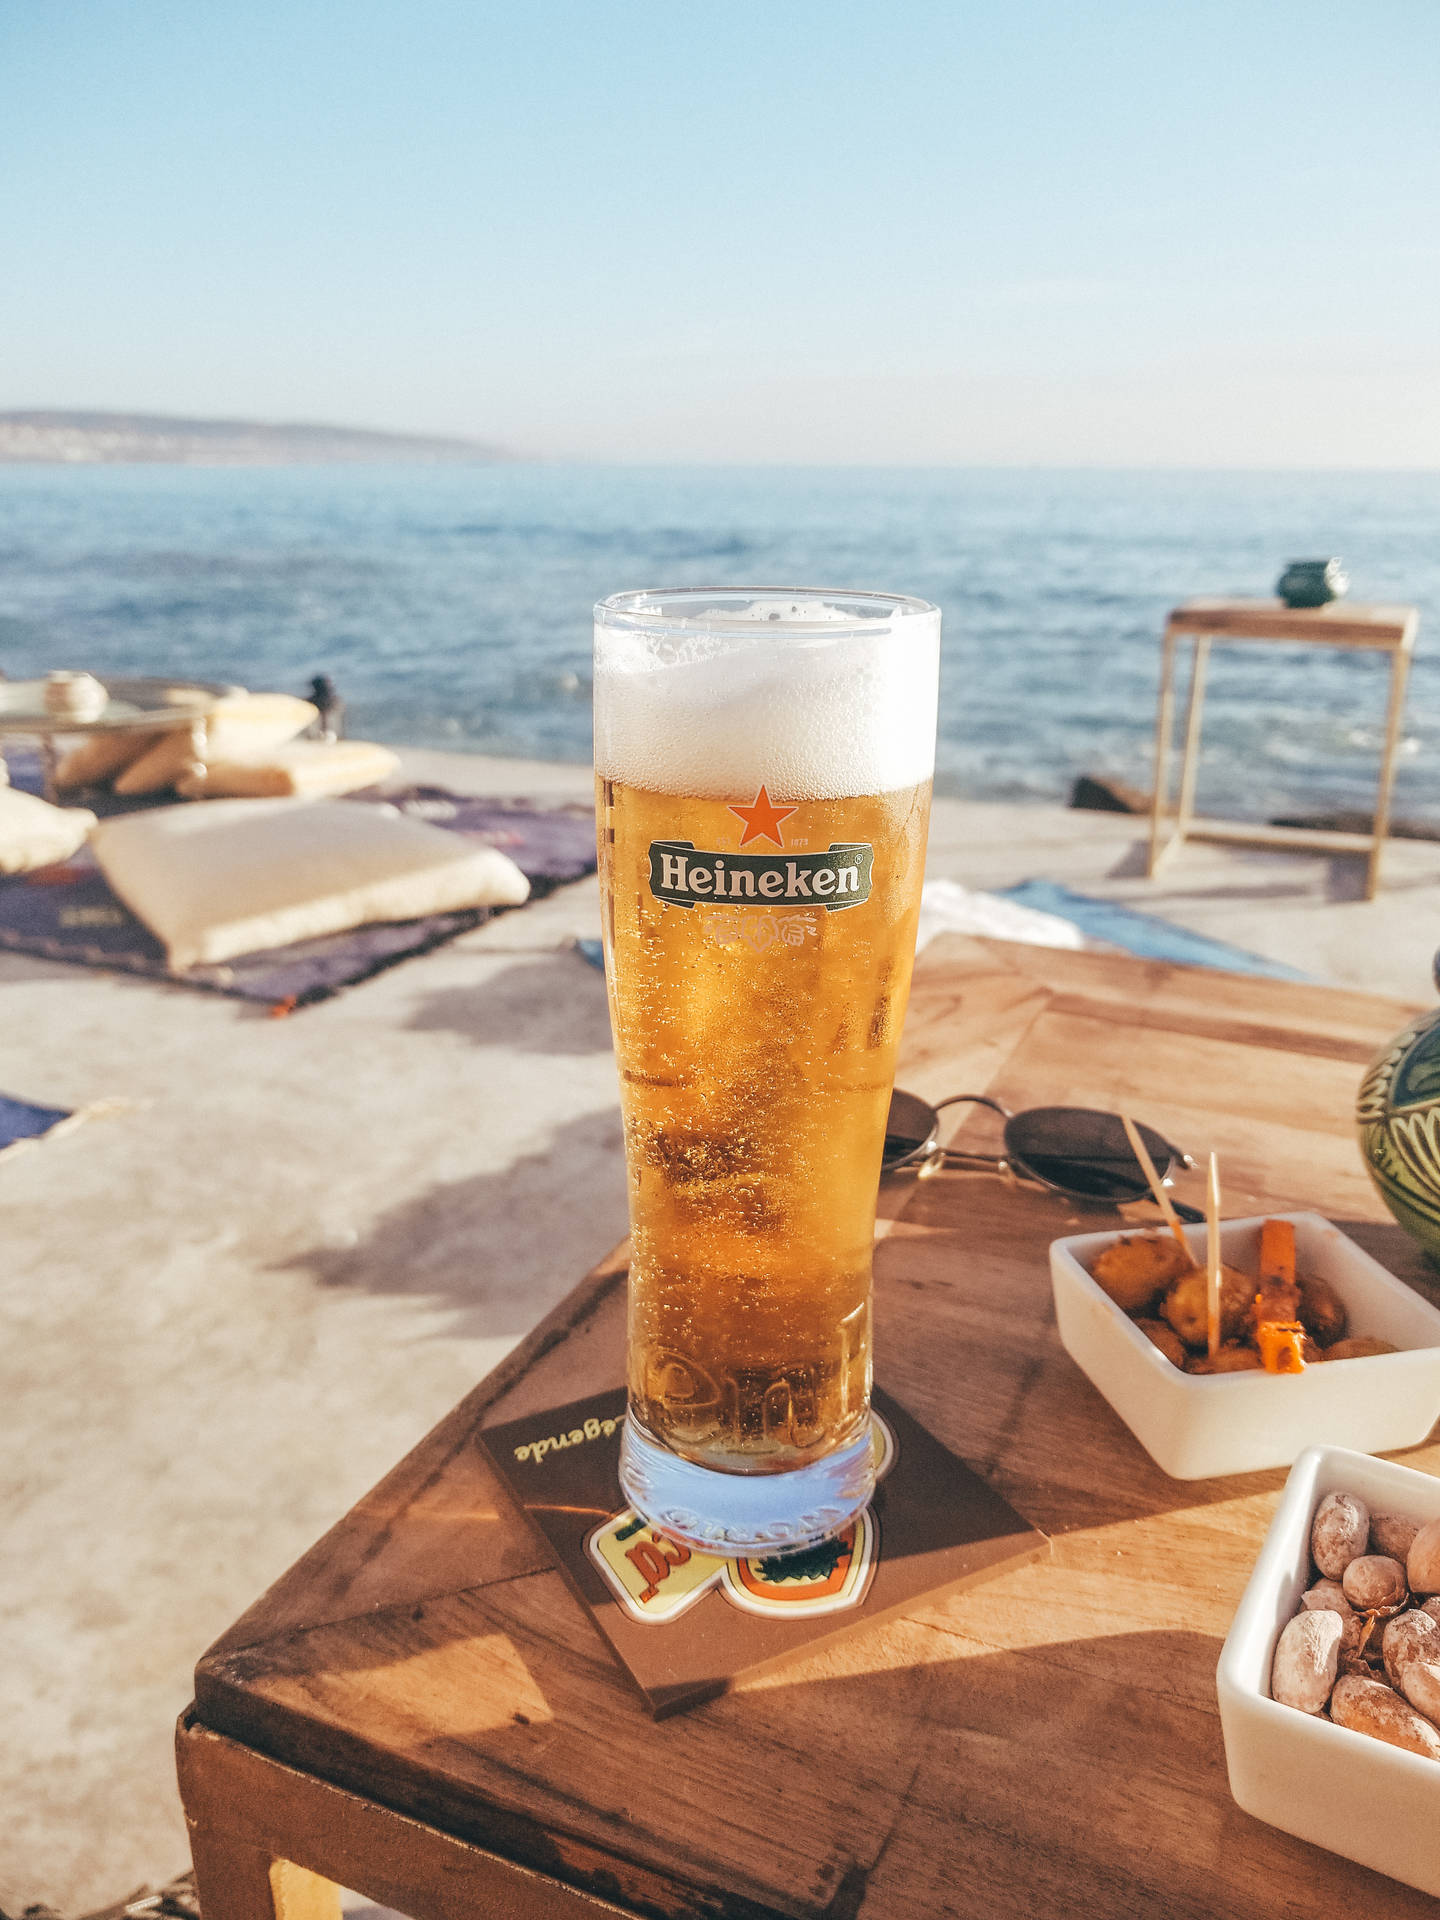 Raise a glass of Heineken beer with friends and make it a night to remember Wallpaper